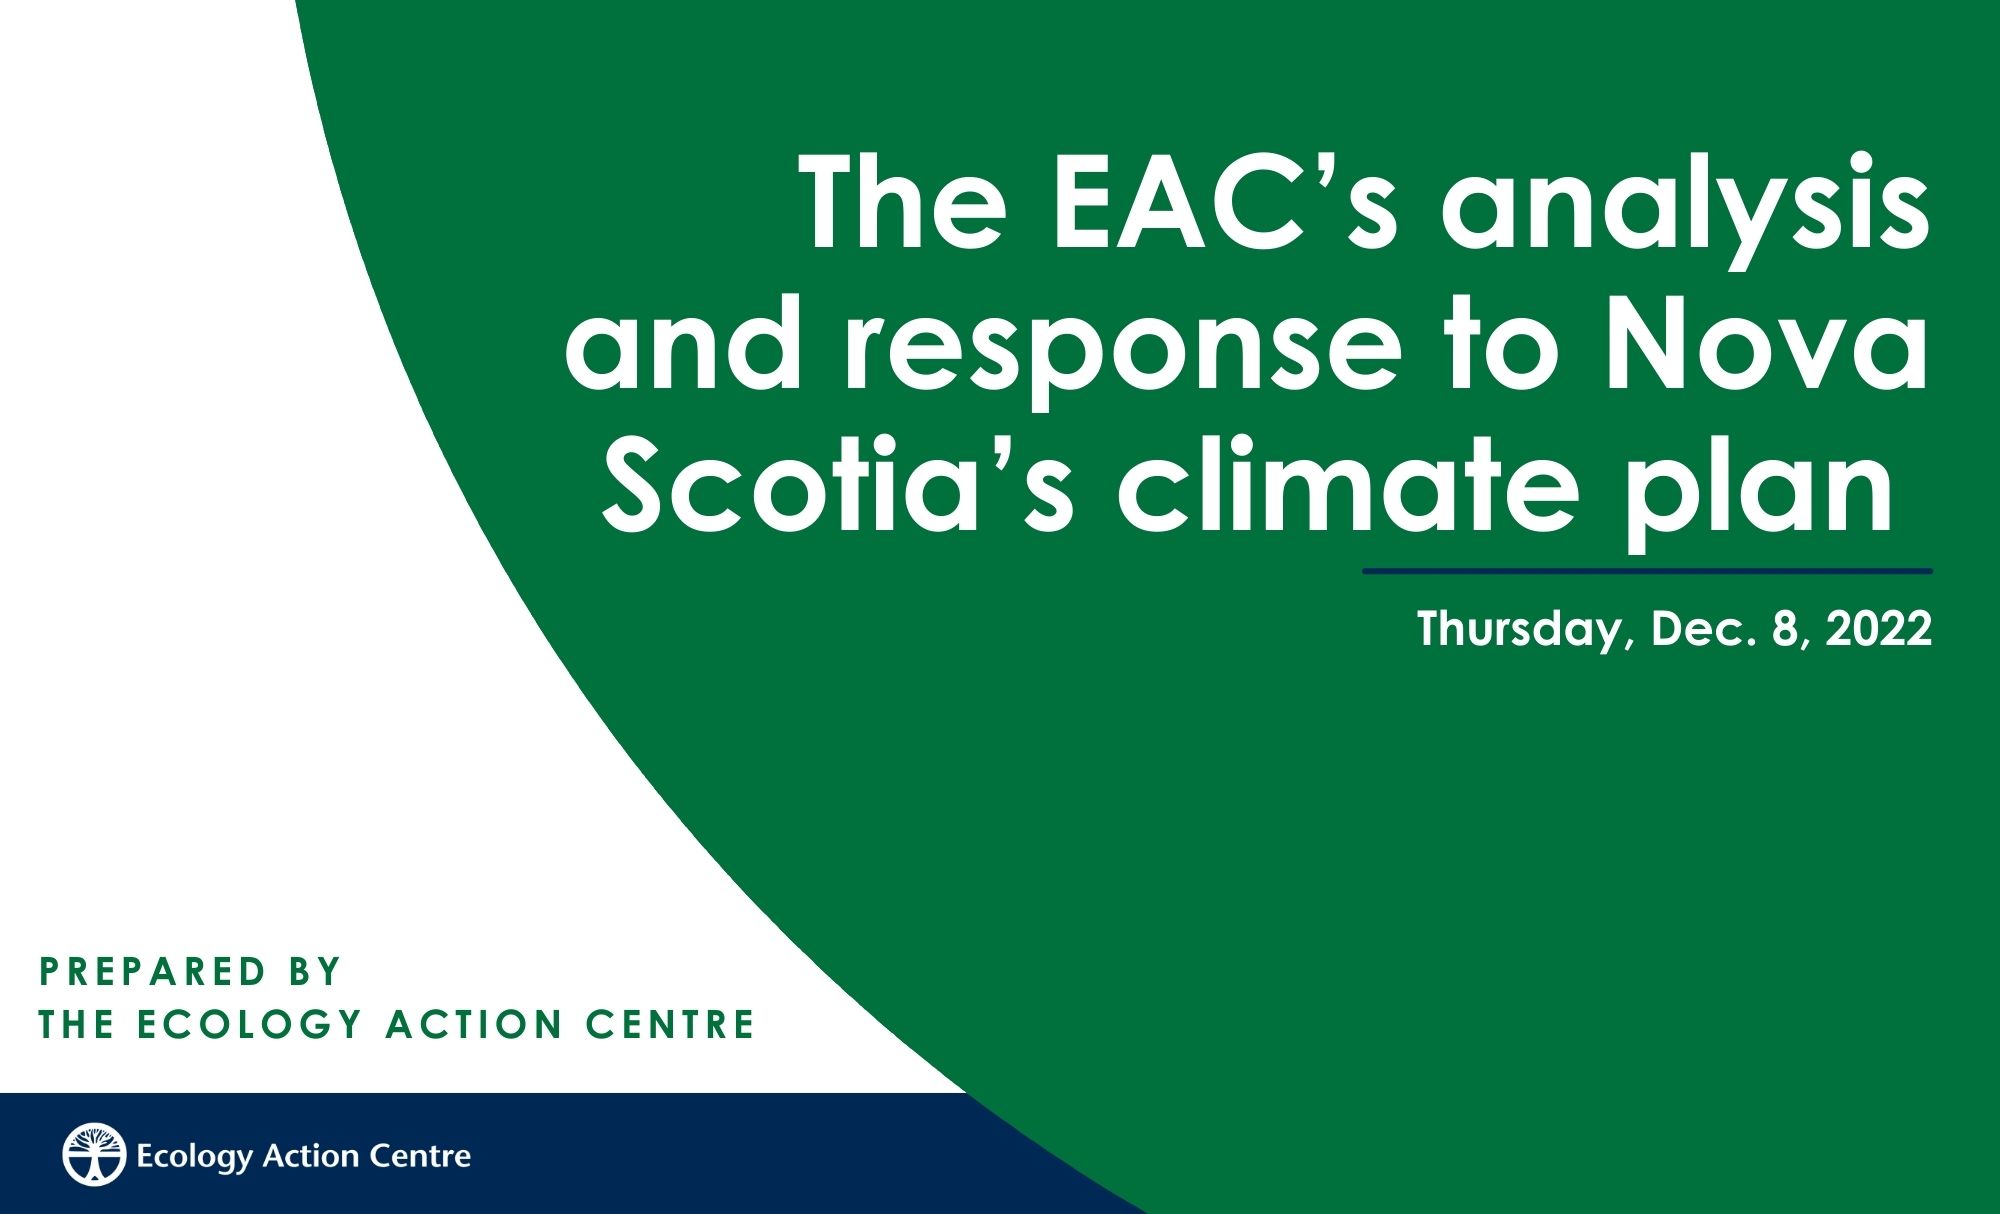 the cover of the EAC's analysis of the climate plan